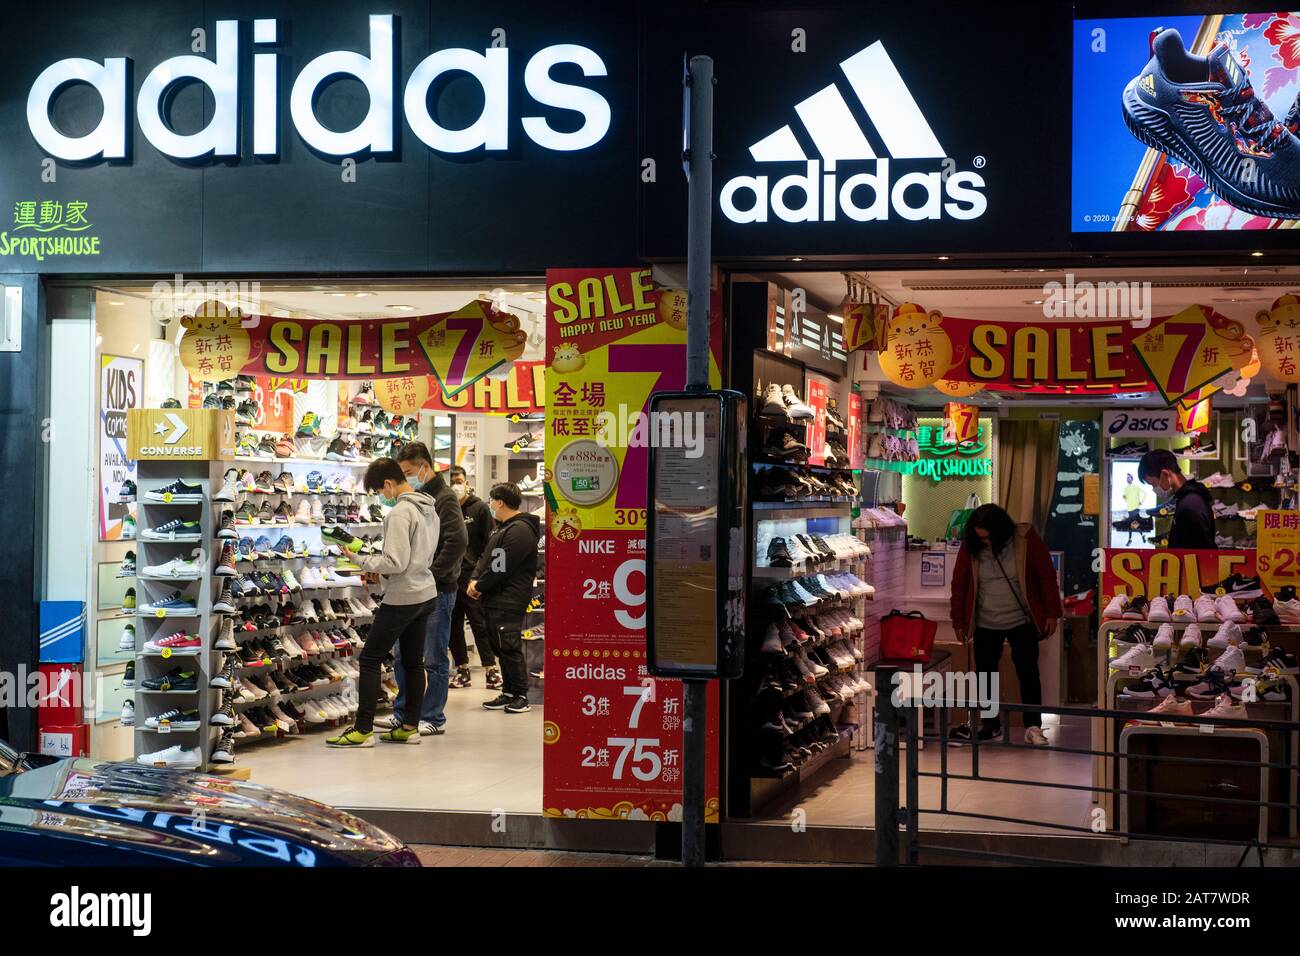 is adidas a german brand